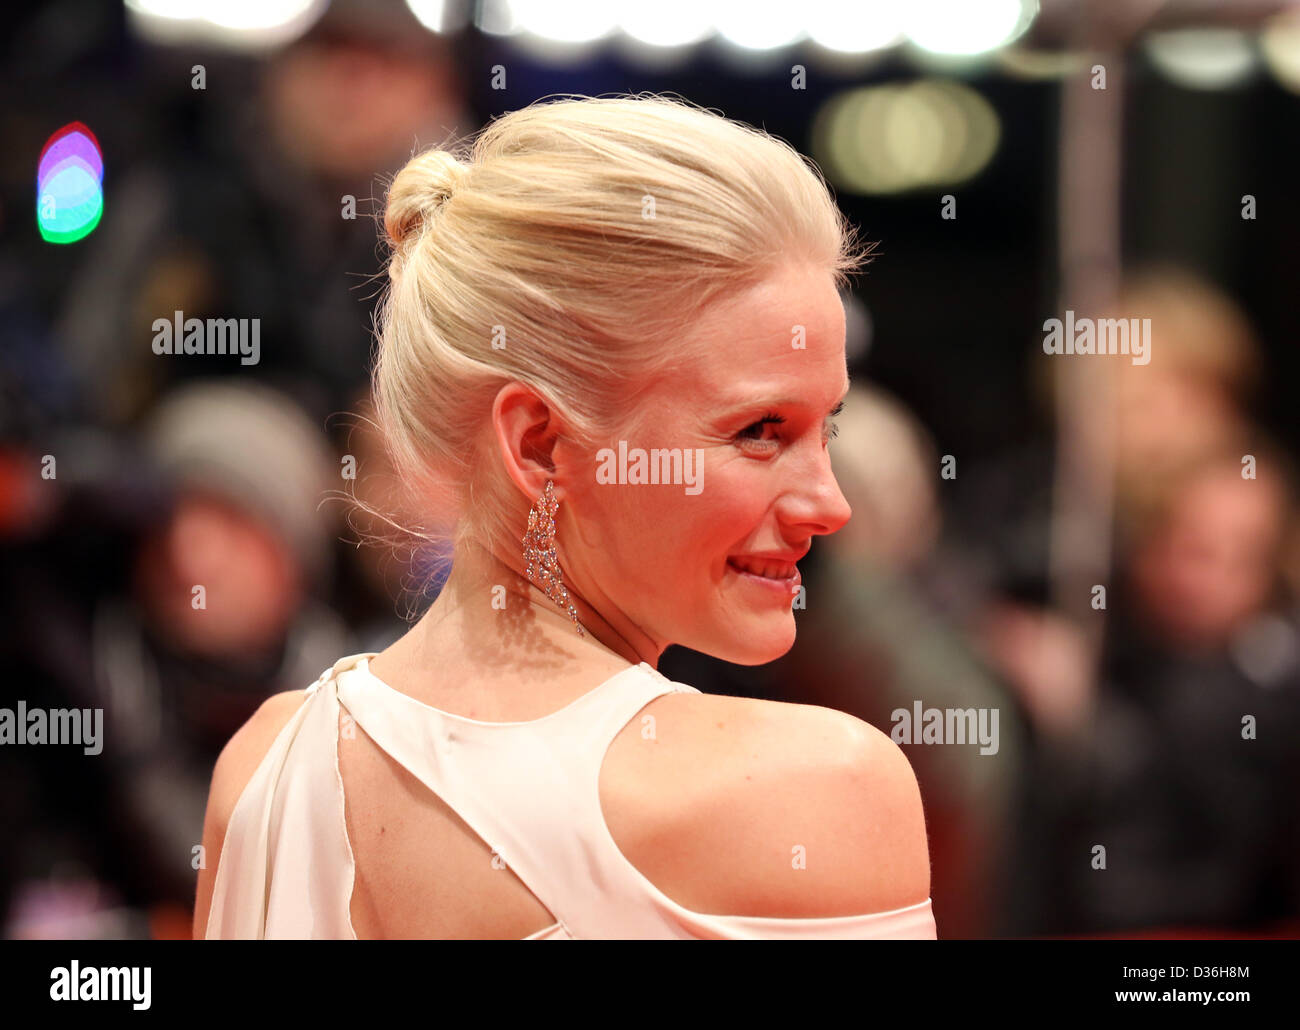 Finnish actress and shooting star 2013 Laura Birn arrives for the Shooting Star 2013 award ceremony during the 63rd annual Berlin International Film Festival in the Berlinale palace in Berlin, Germany, 11 February 2013. Photo: Kay Nietfeld dpa Stock Photo